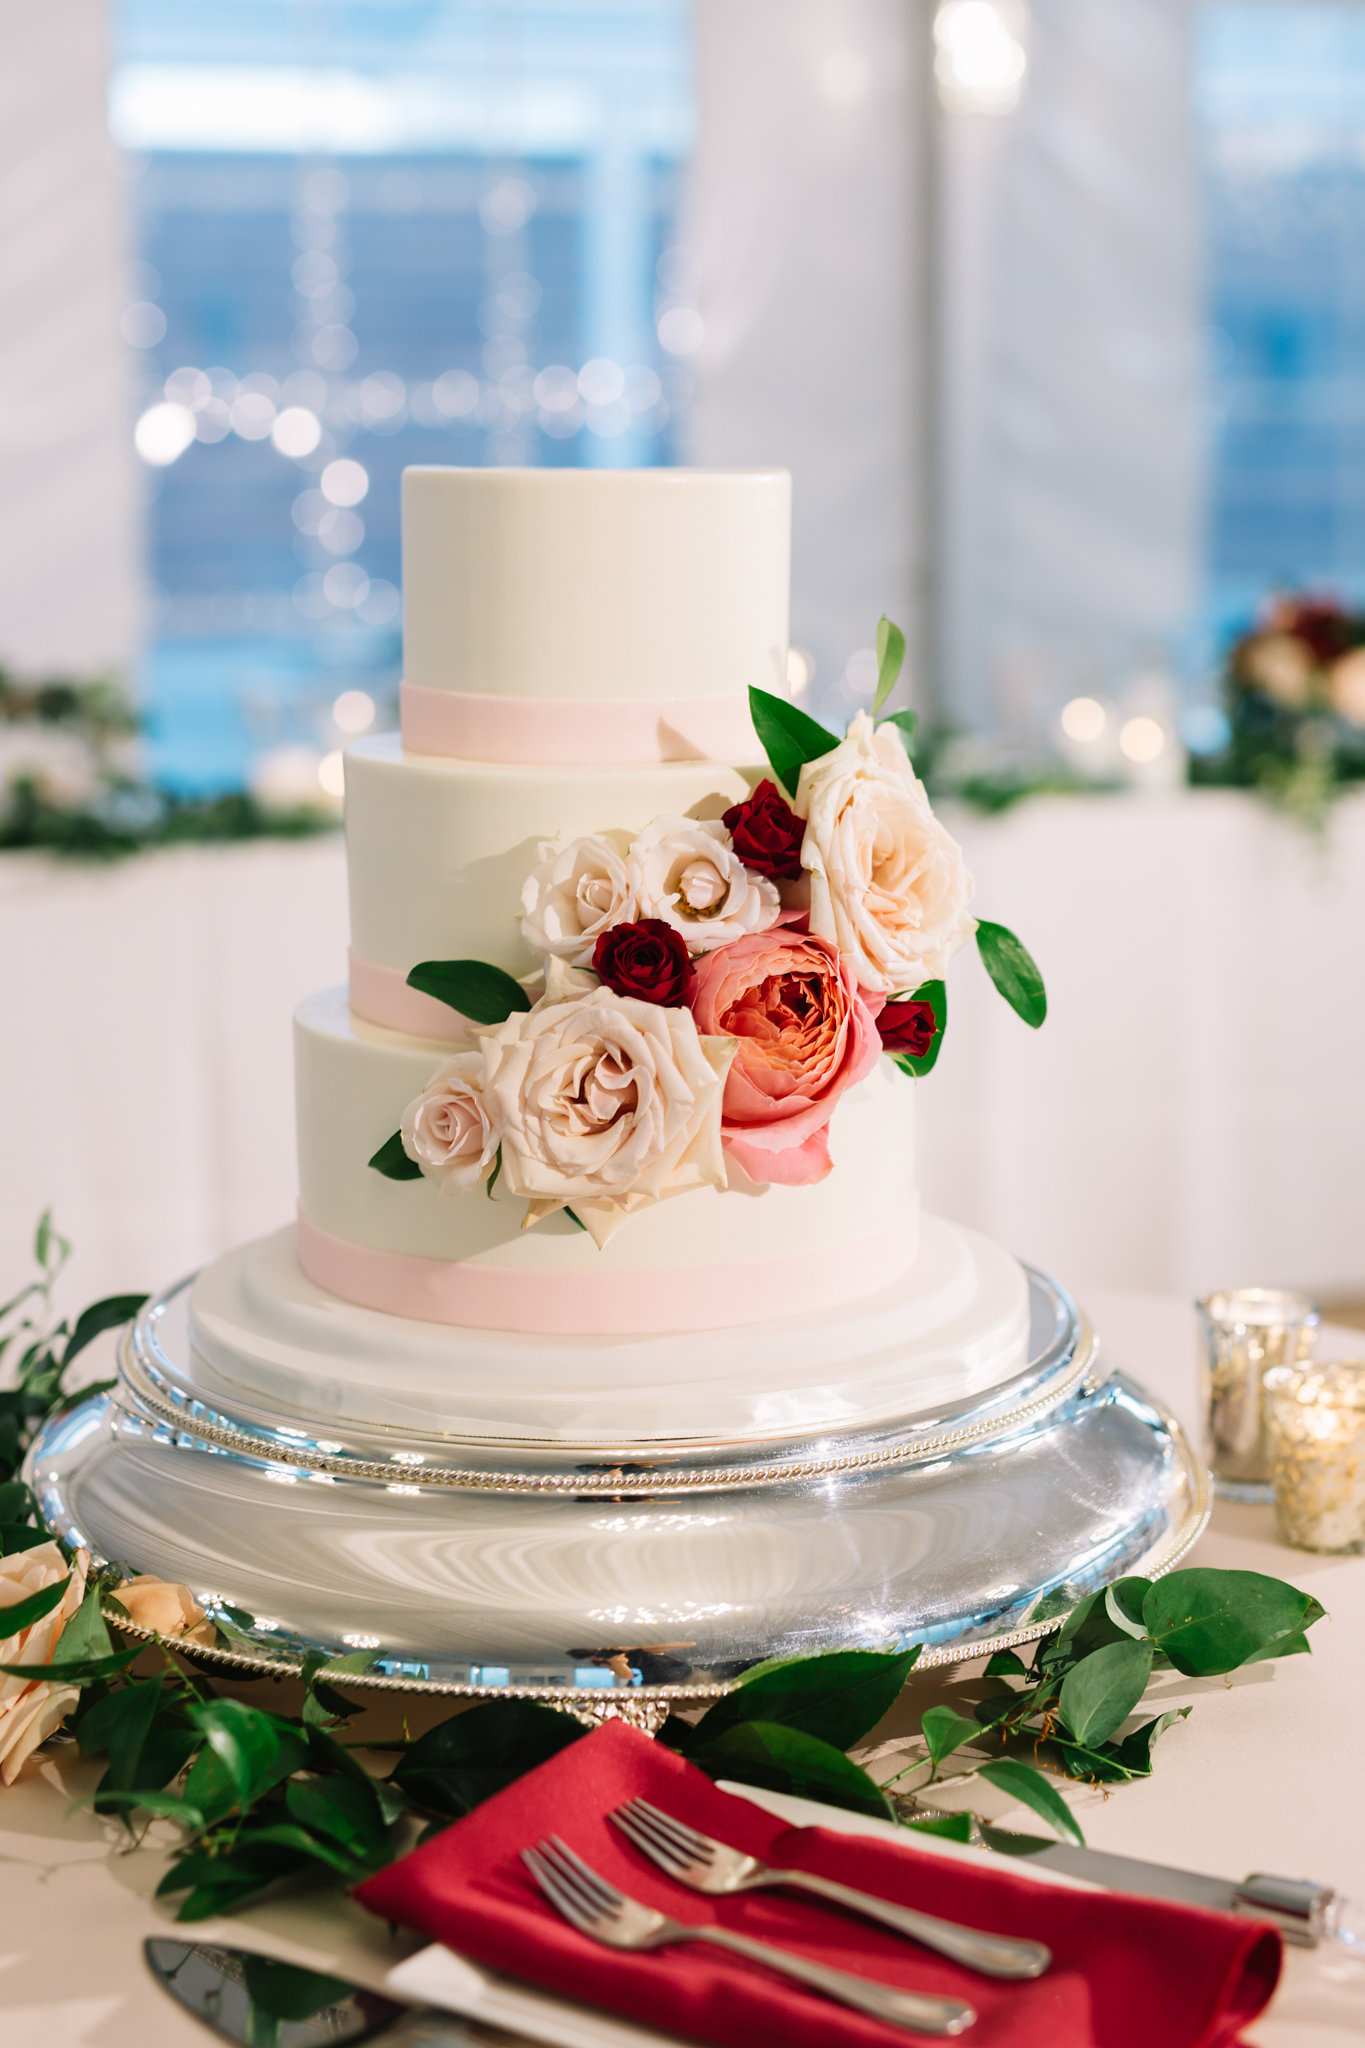 Wedding cake decorated with cream, blush, and coral roses.